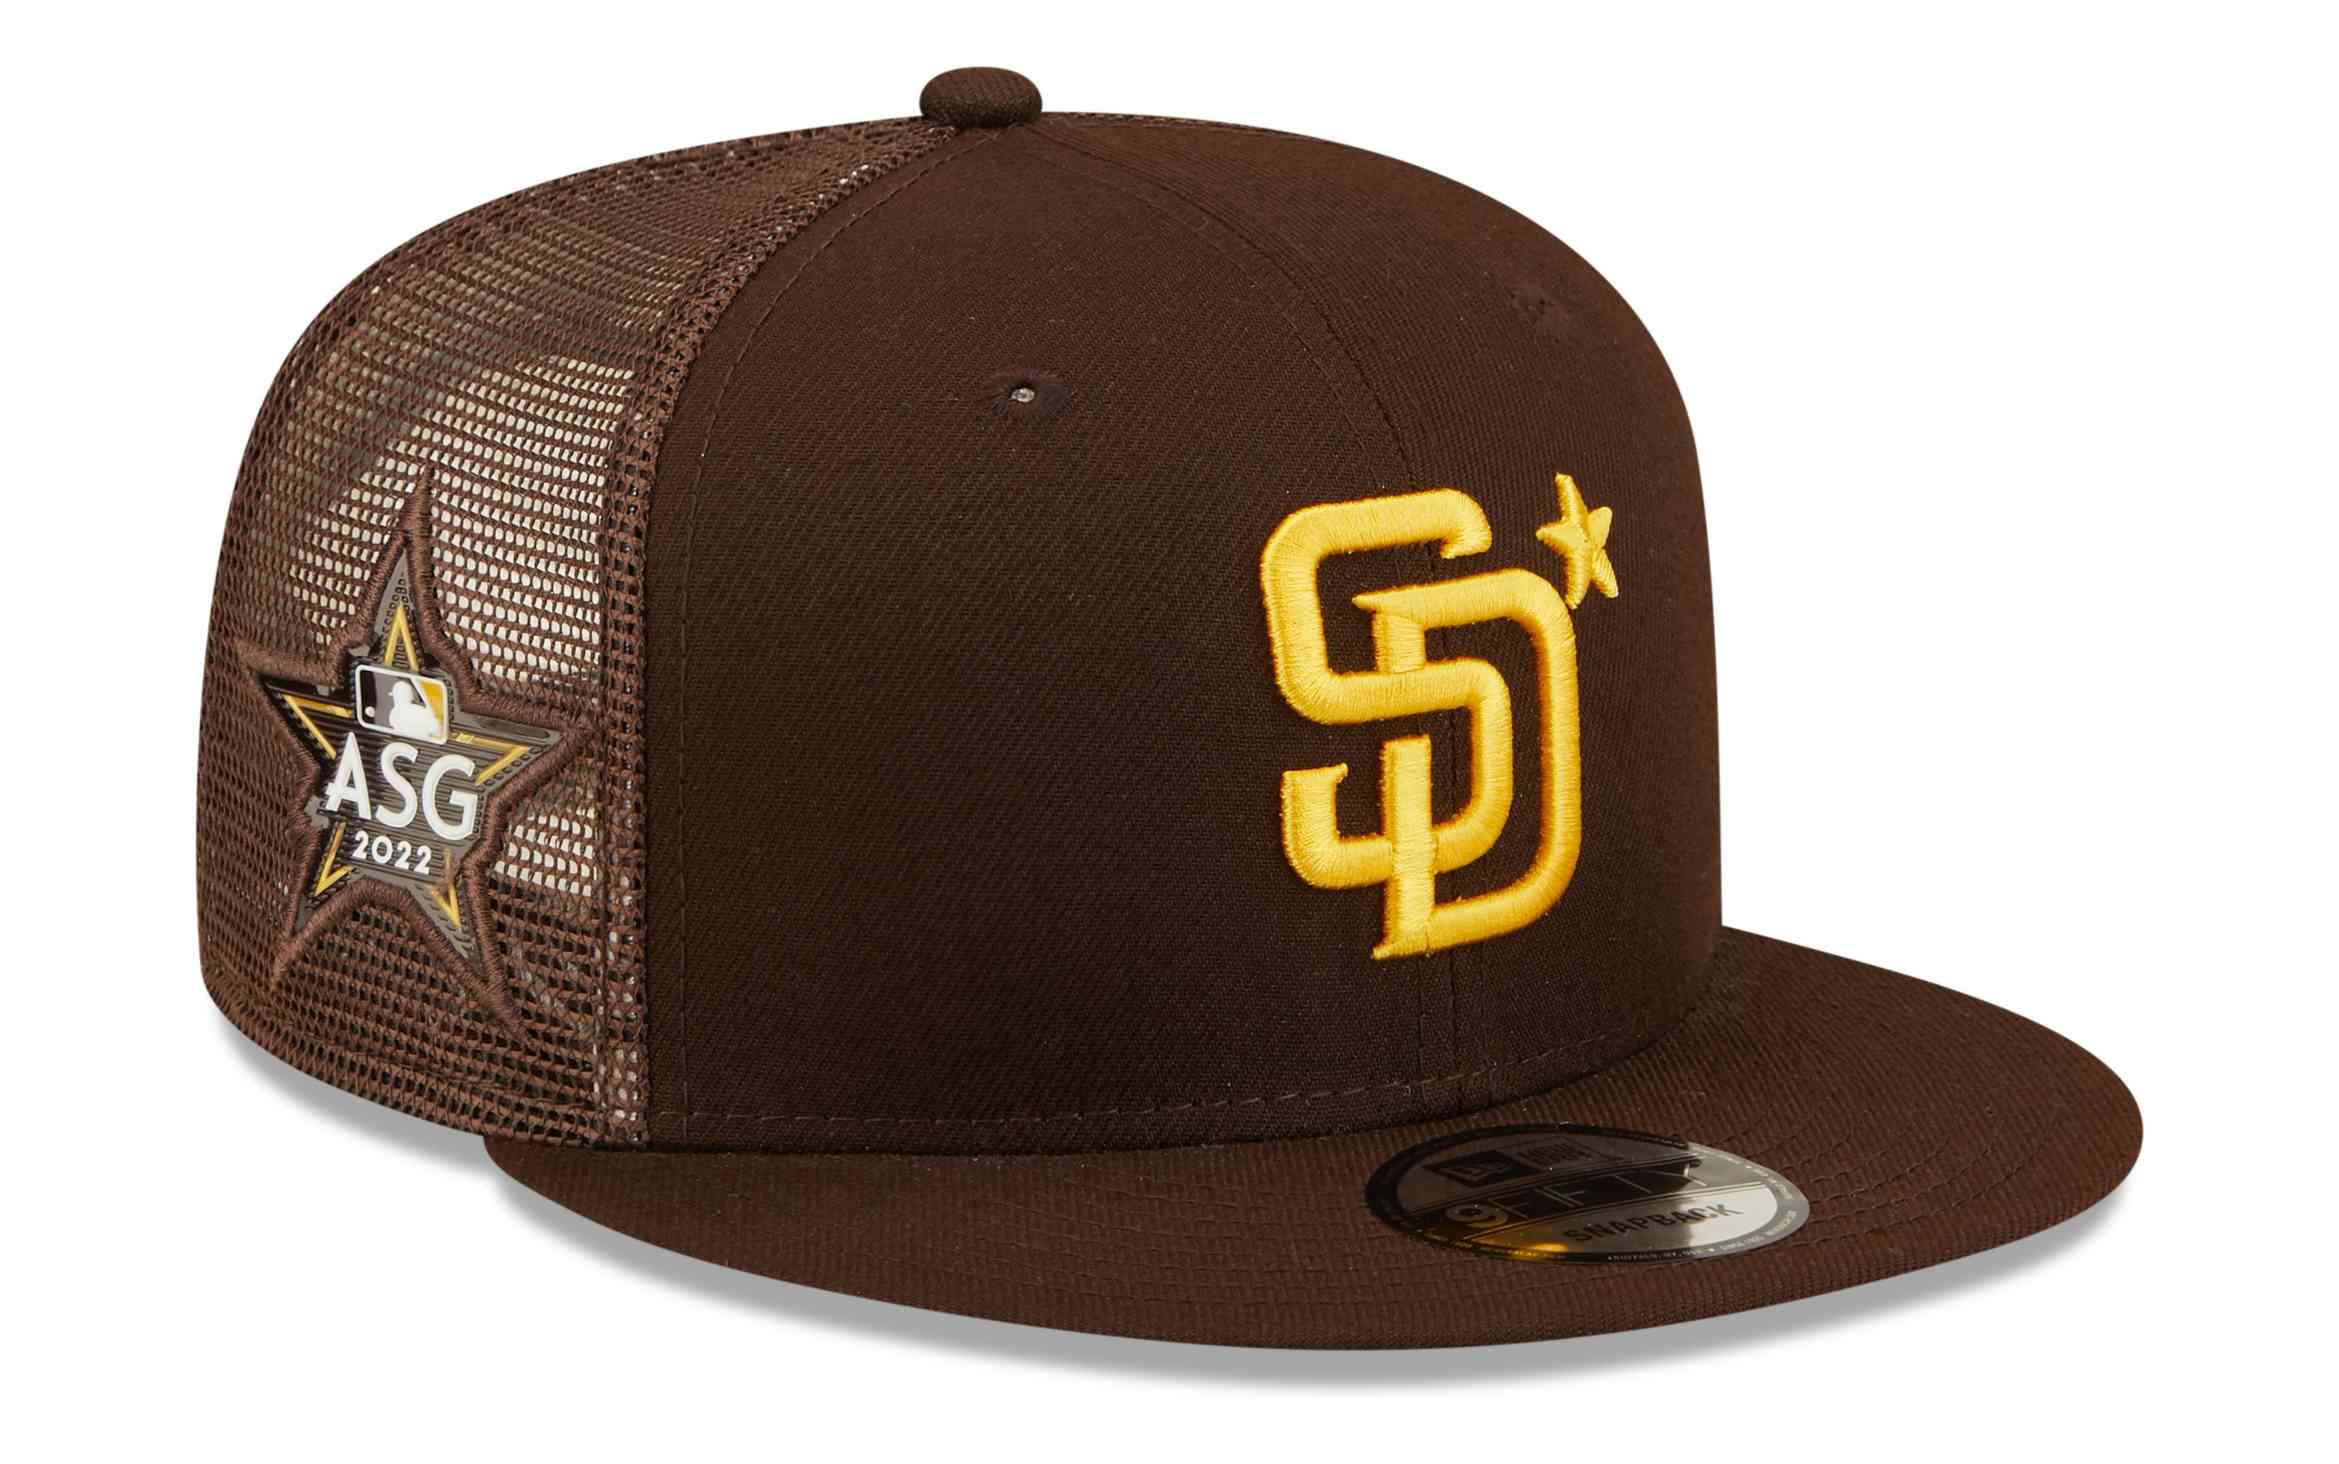 New Era - MLB San Diego Padres All Star Game Patch 9Fifty